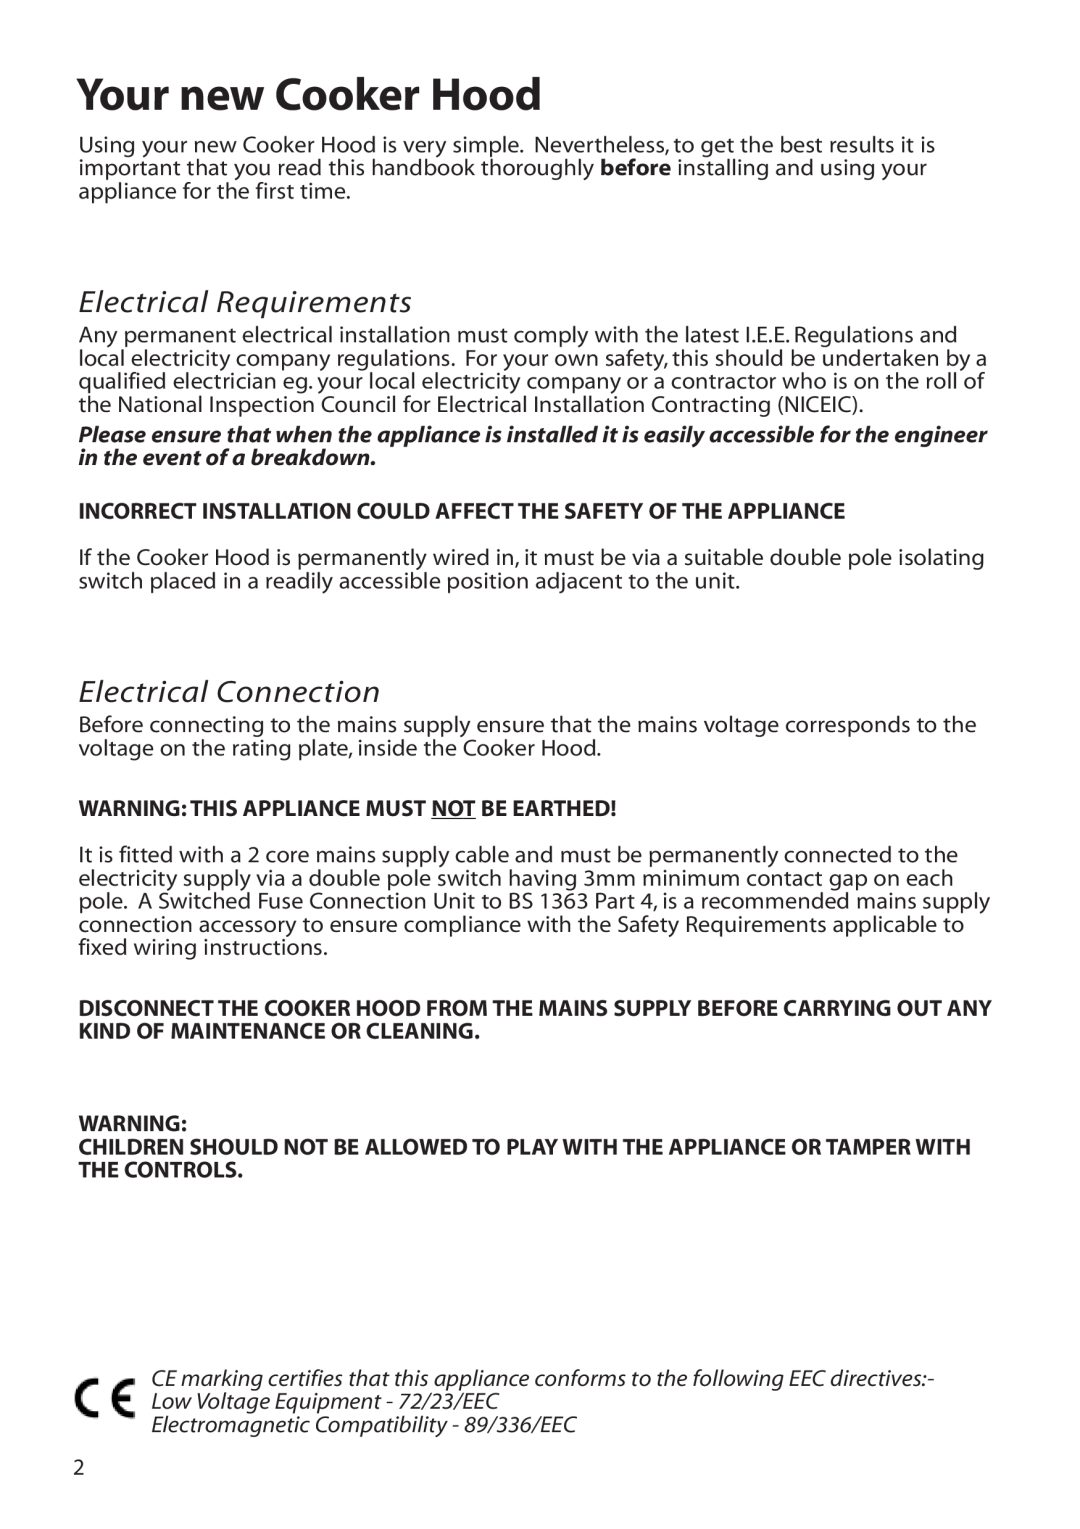 Hotpoint HTV10 manual Your new Cooker Hood, Electrical Requirements, Electrical Connection 